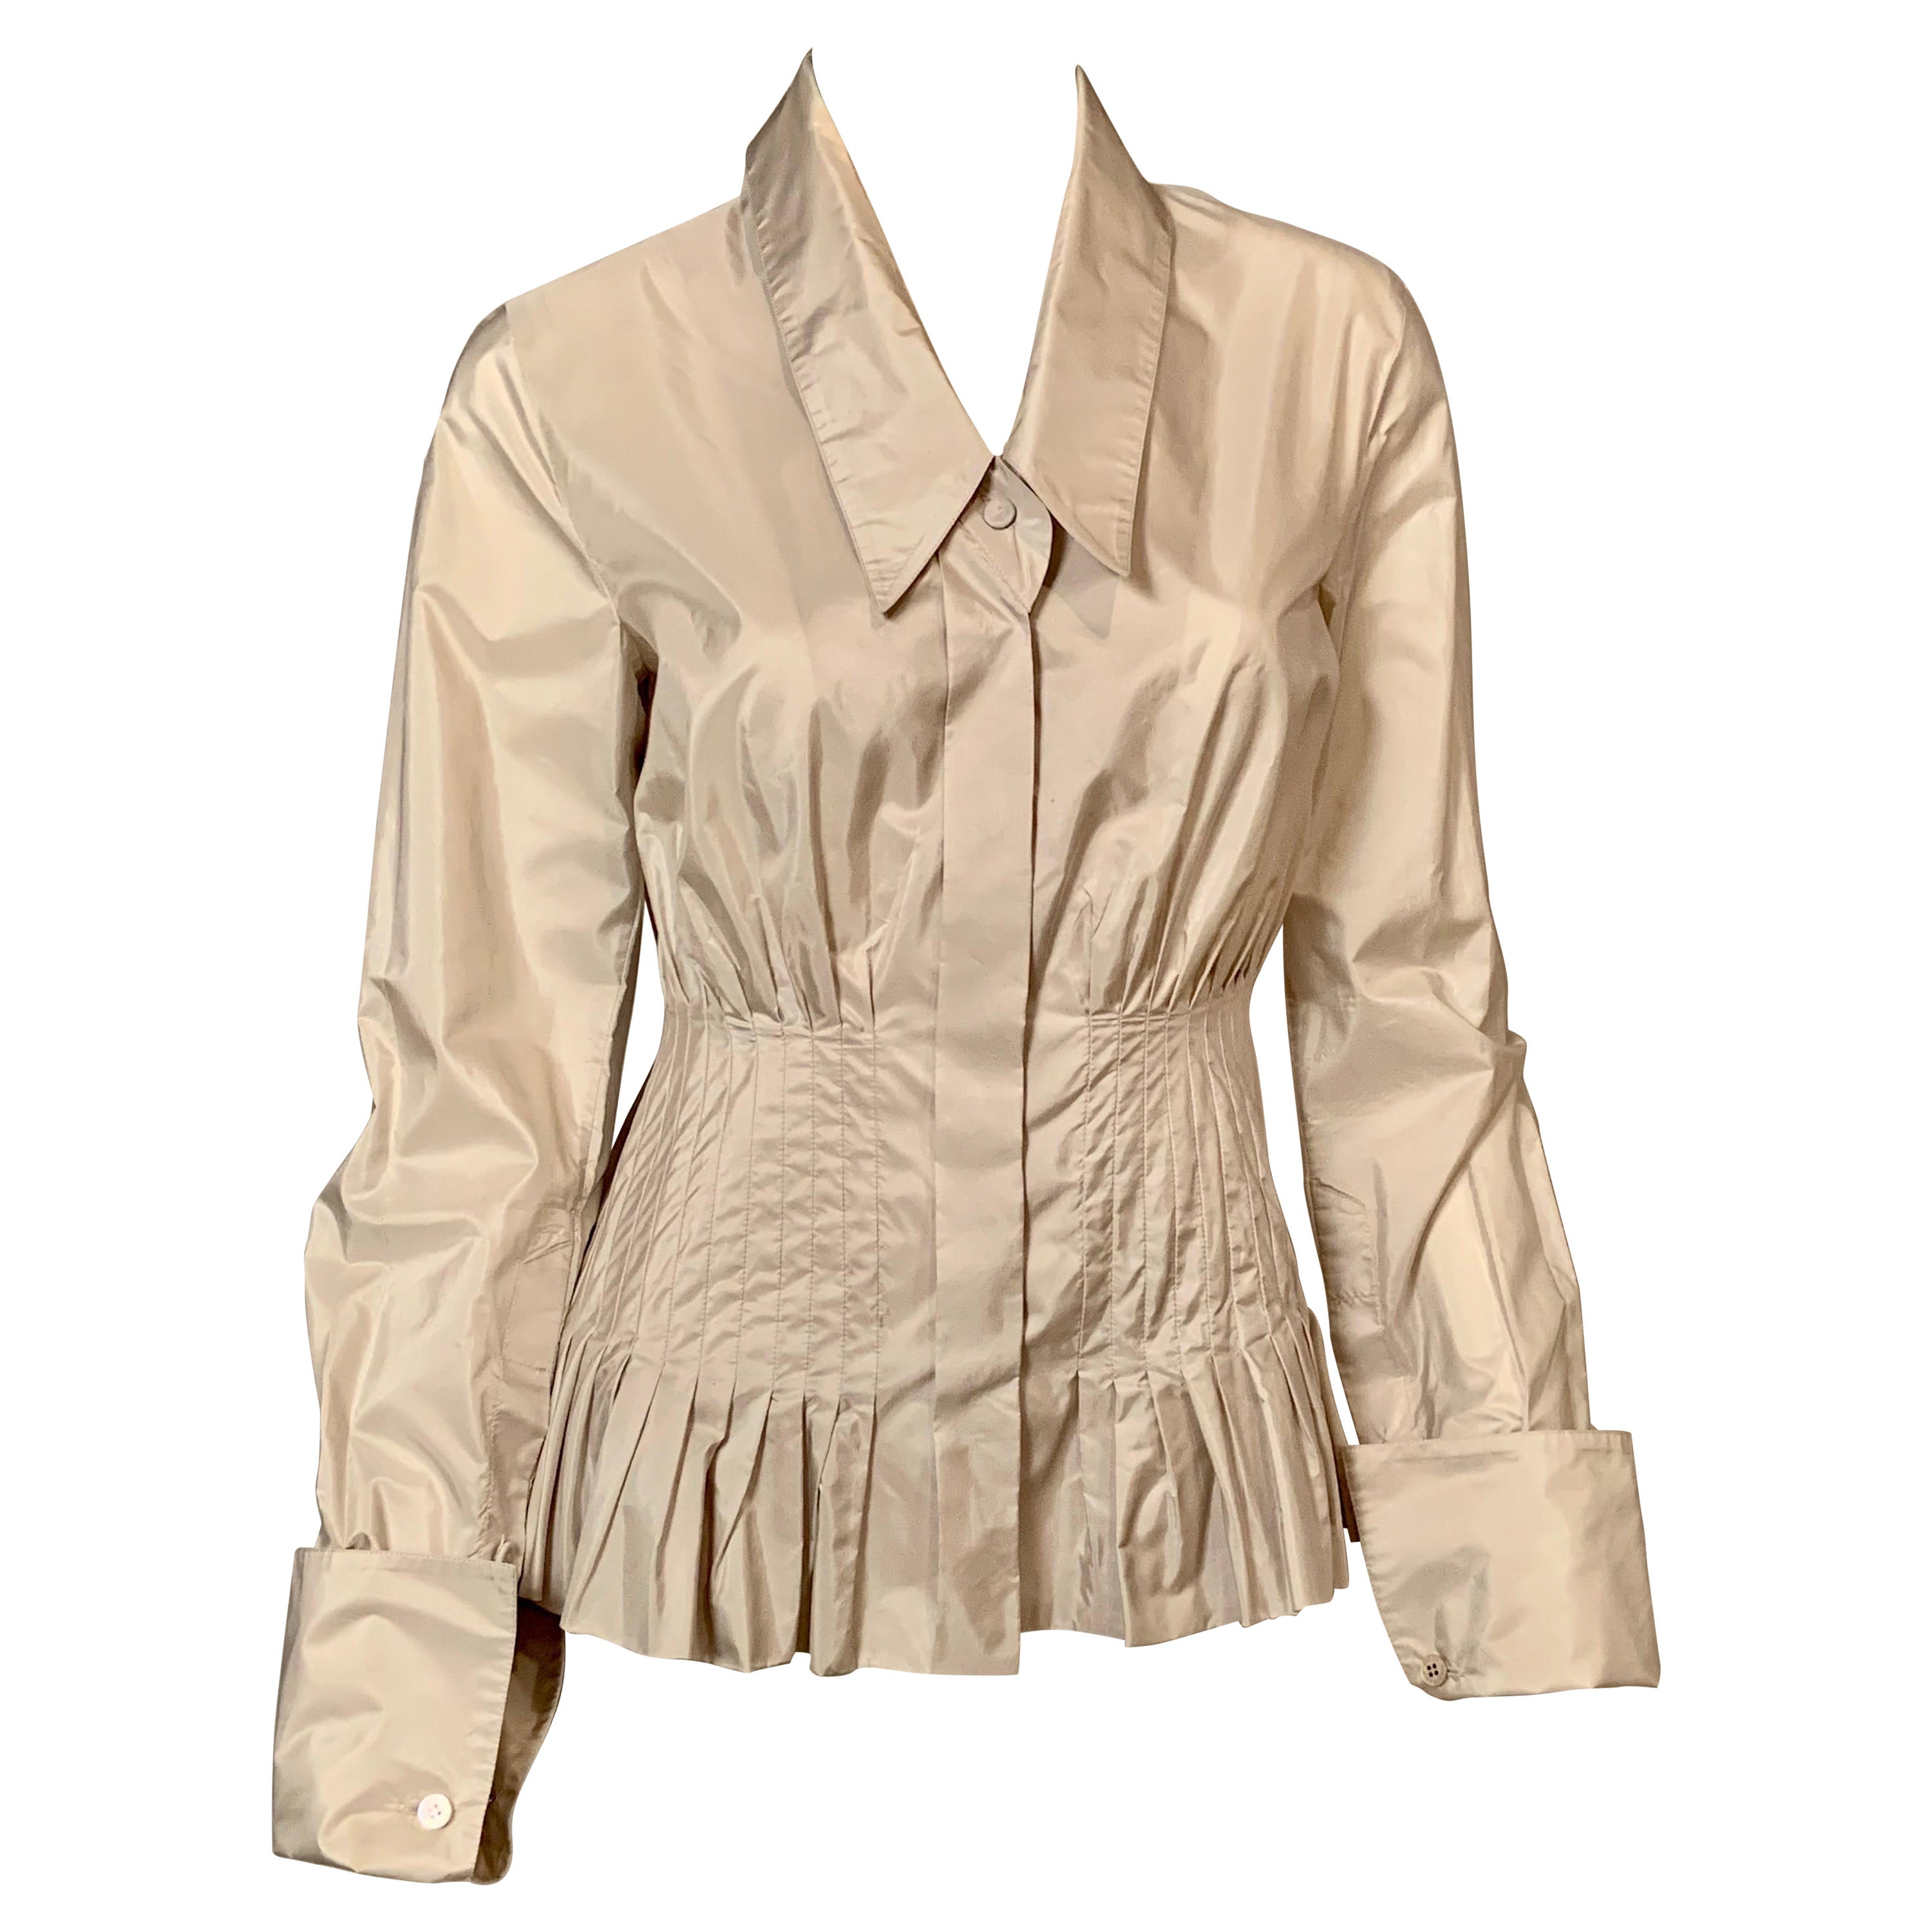 Gianfranco Ferre Pale Oyster Grey Silk Blouse with Peplum For Sale